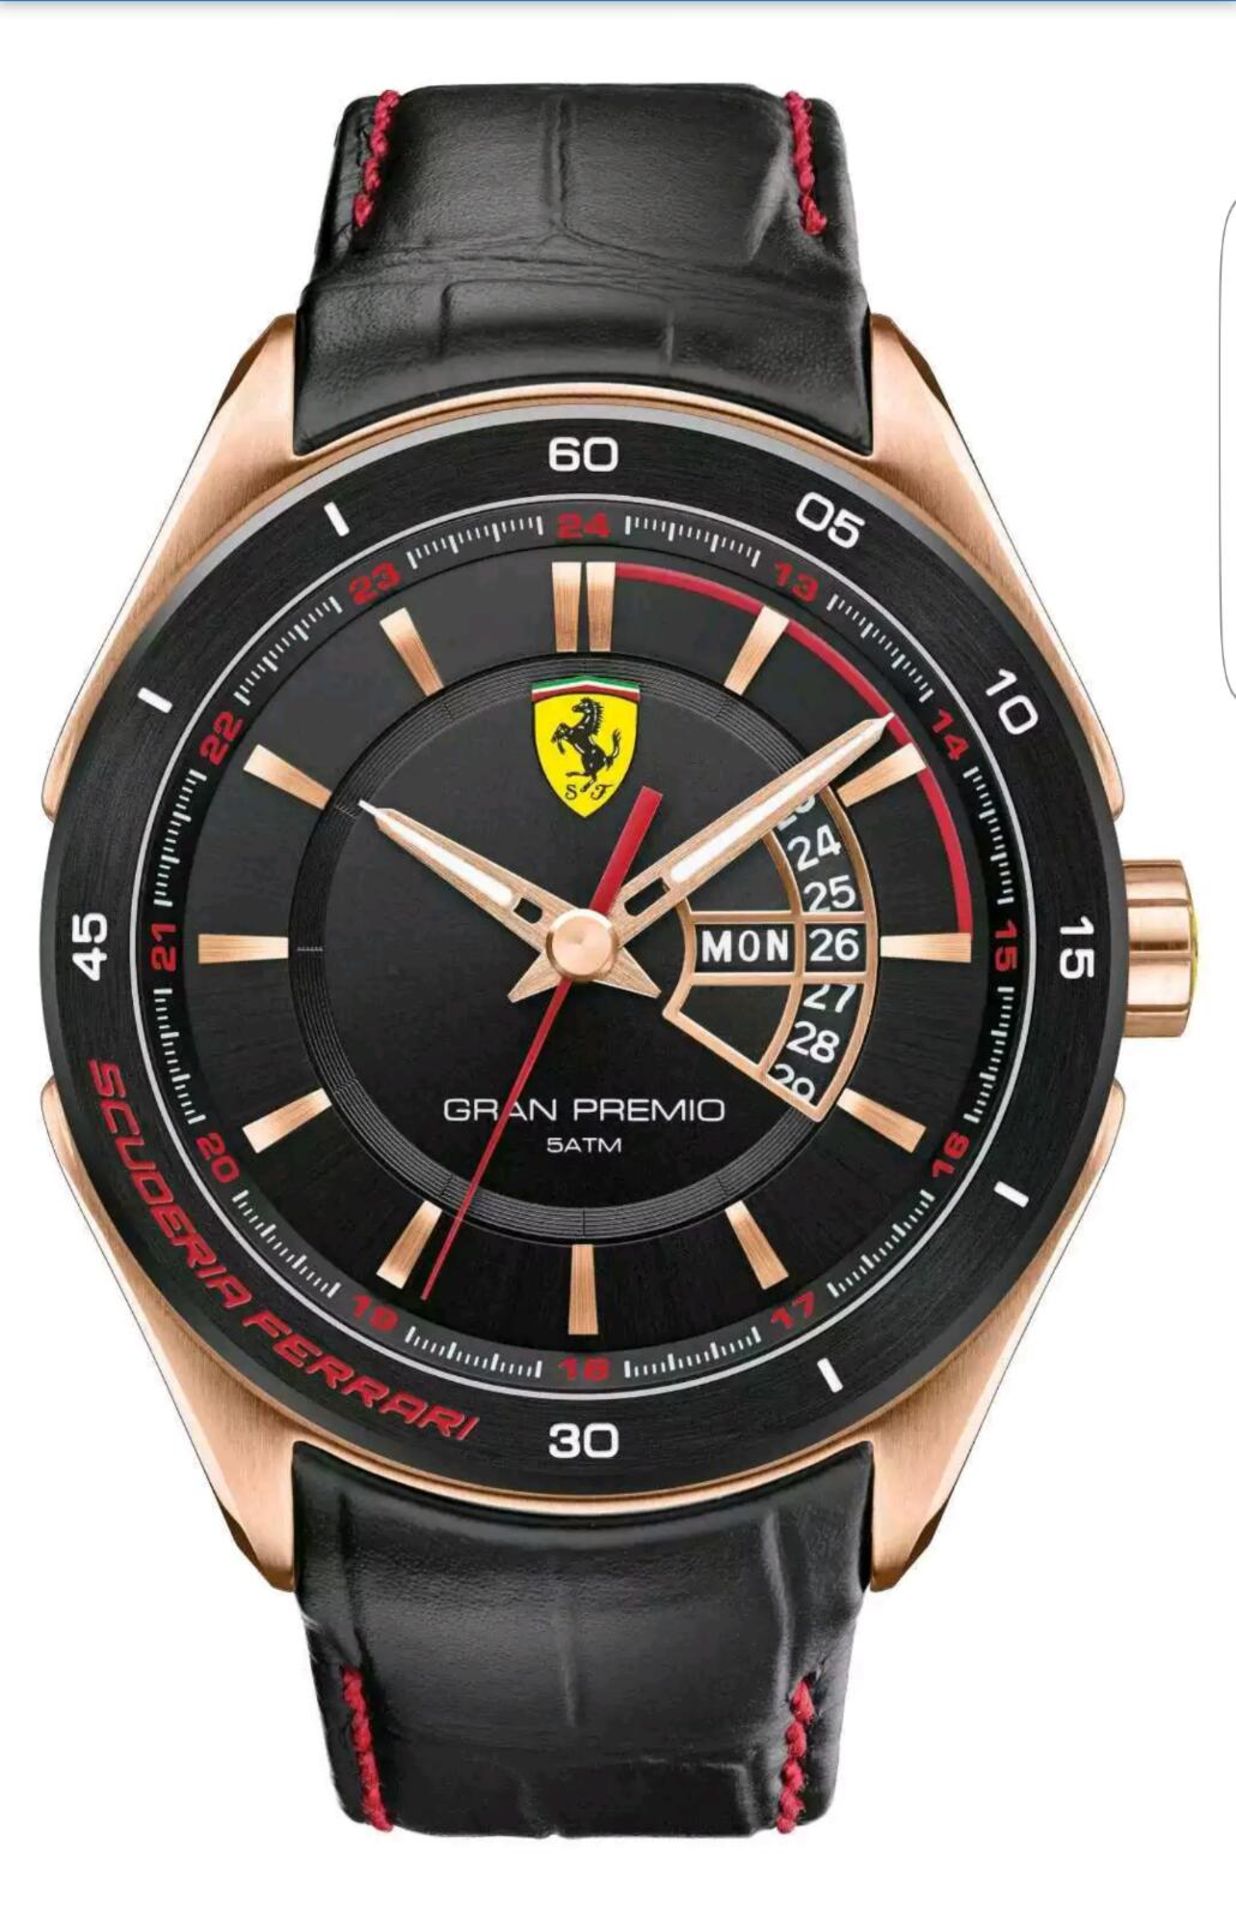 BRAND NEW GENTS FERRARI WATCH, 0830185, COMPLETE WITH ORIGINAL BOX AND MANUAL - RRP £499